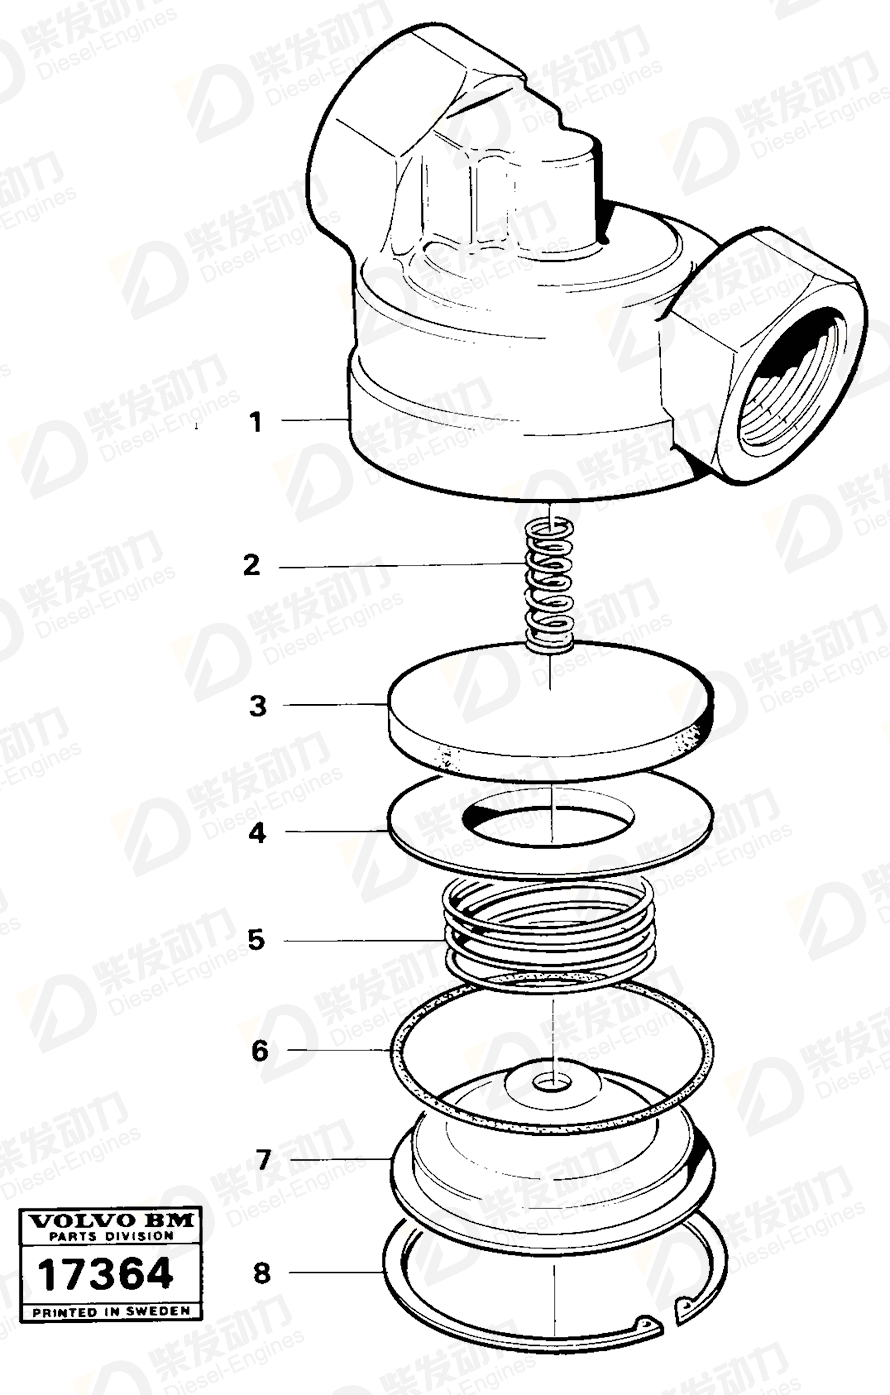 VOLVO Washer 362425 Drawing